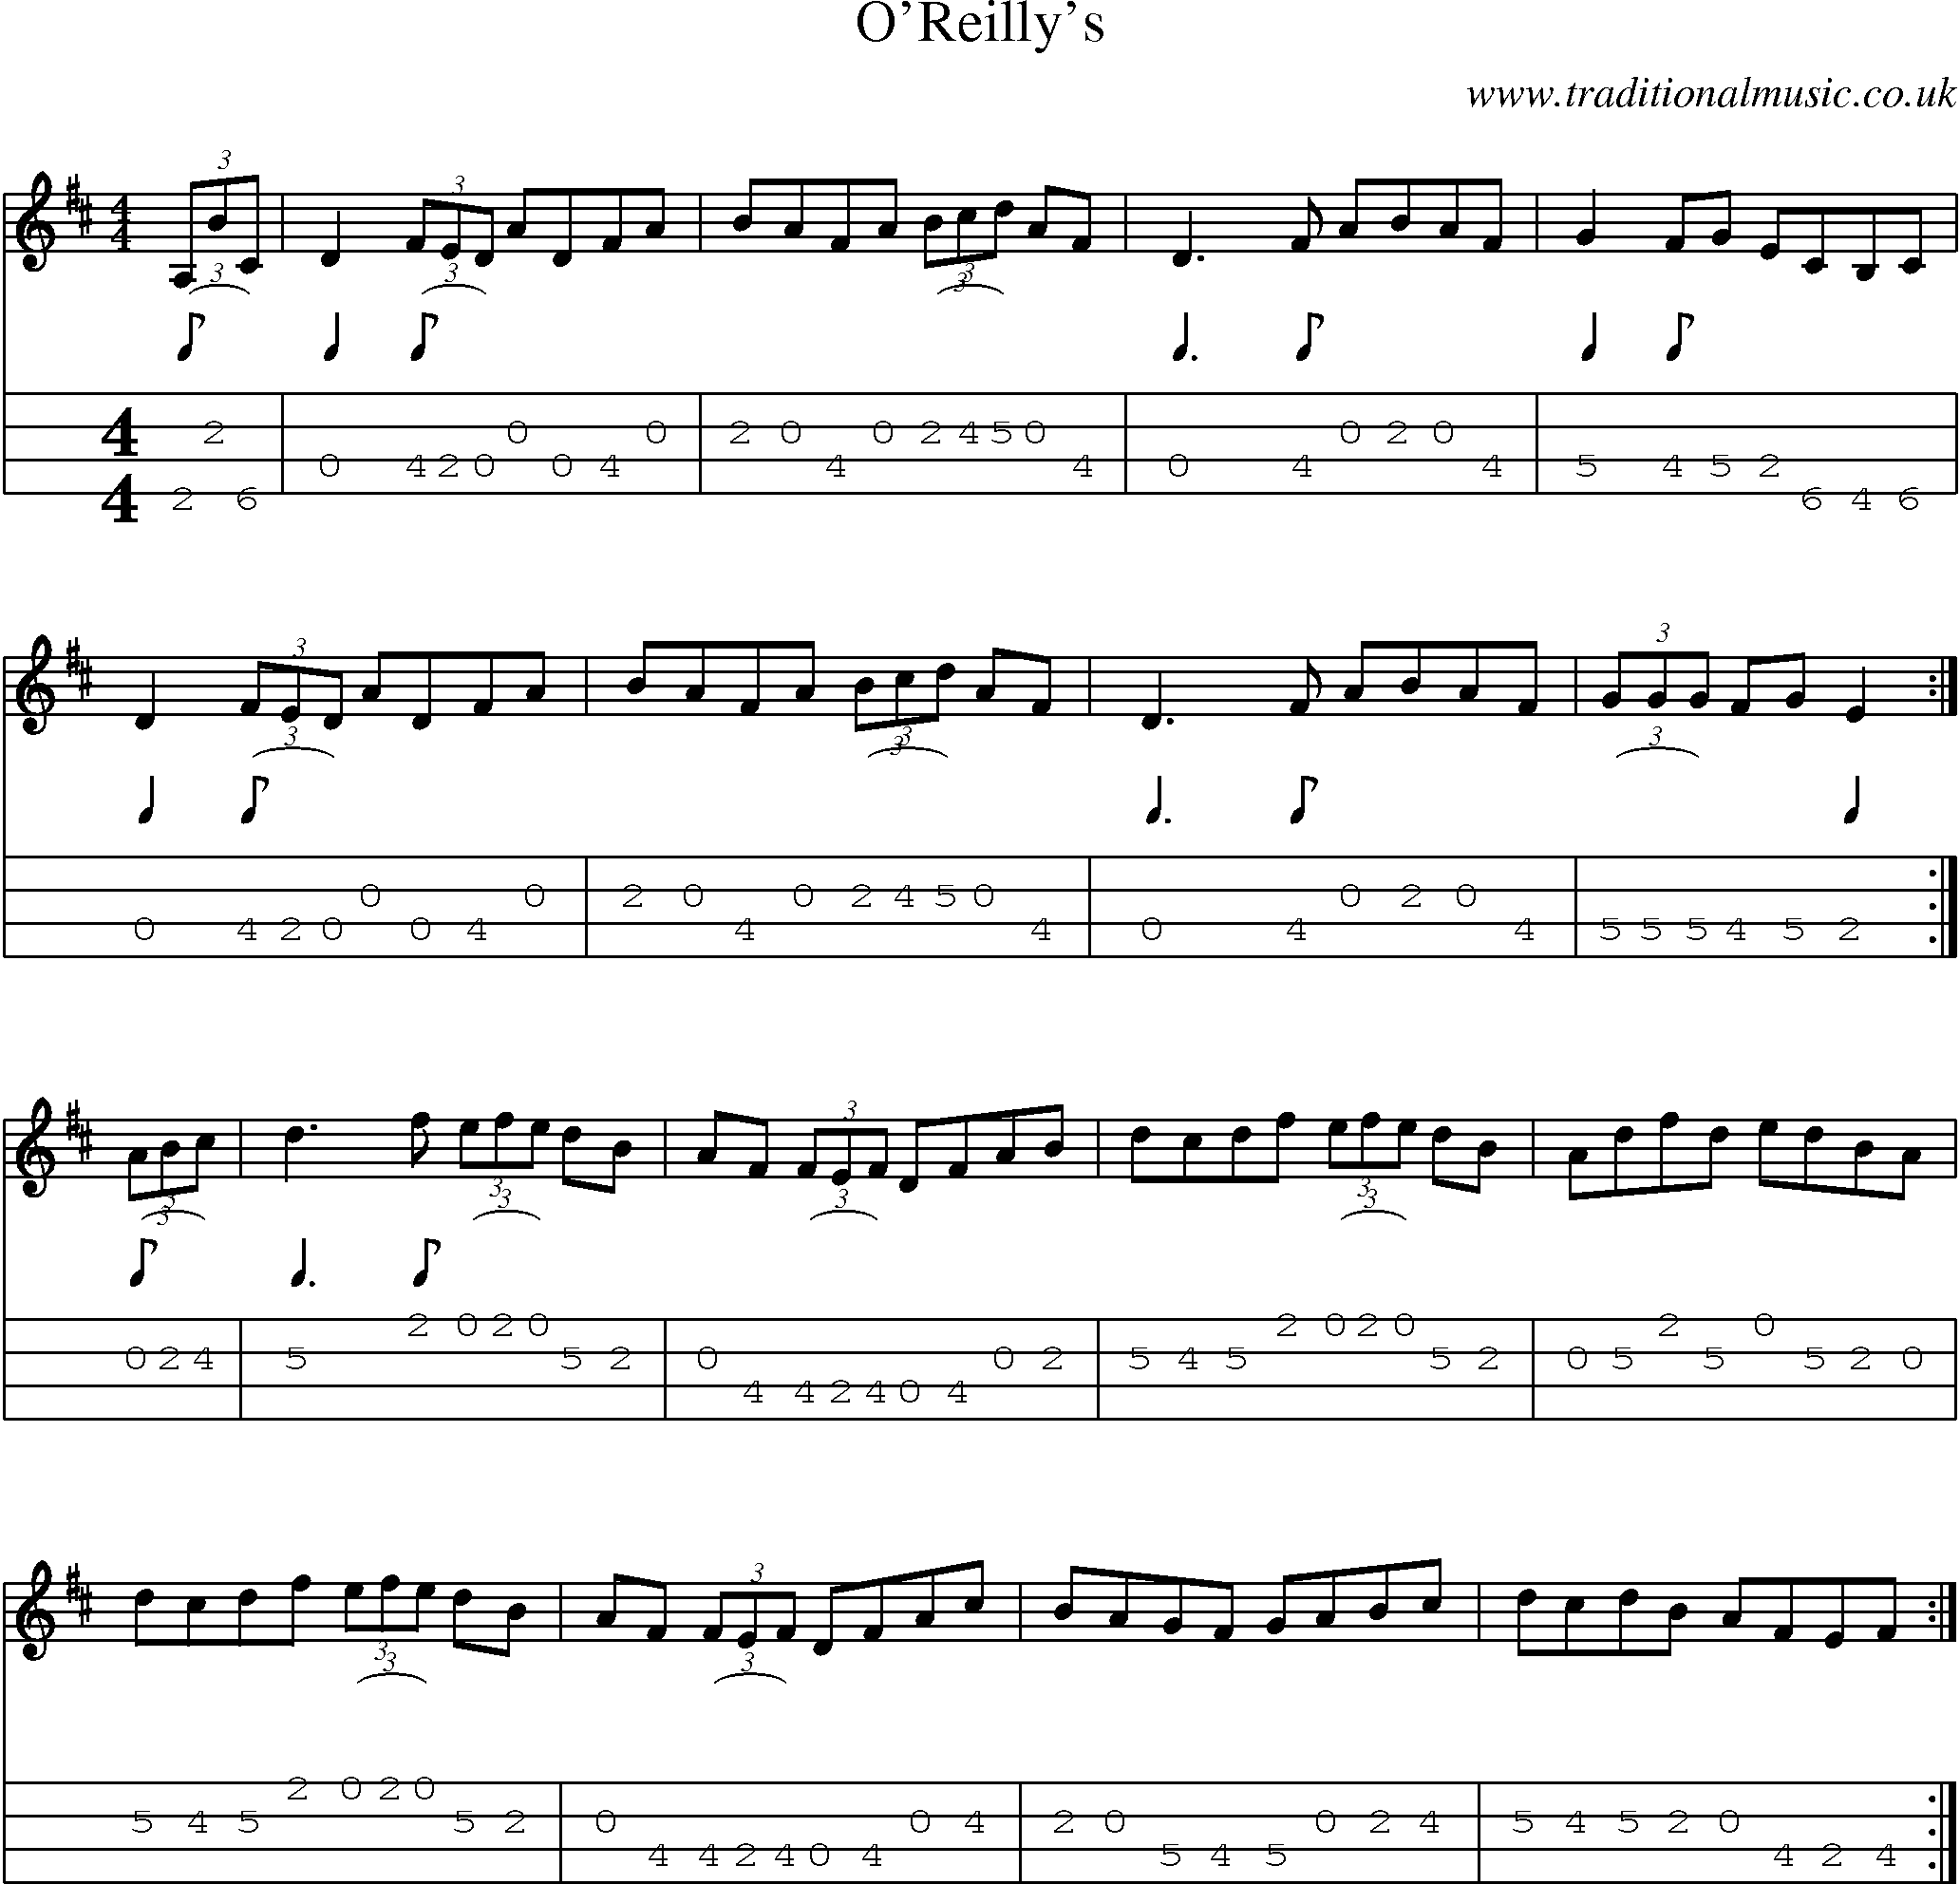 Music Score and Mandolin Tabs for Oreillys